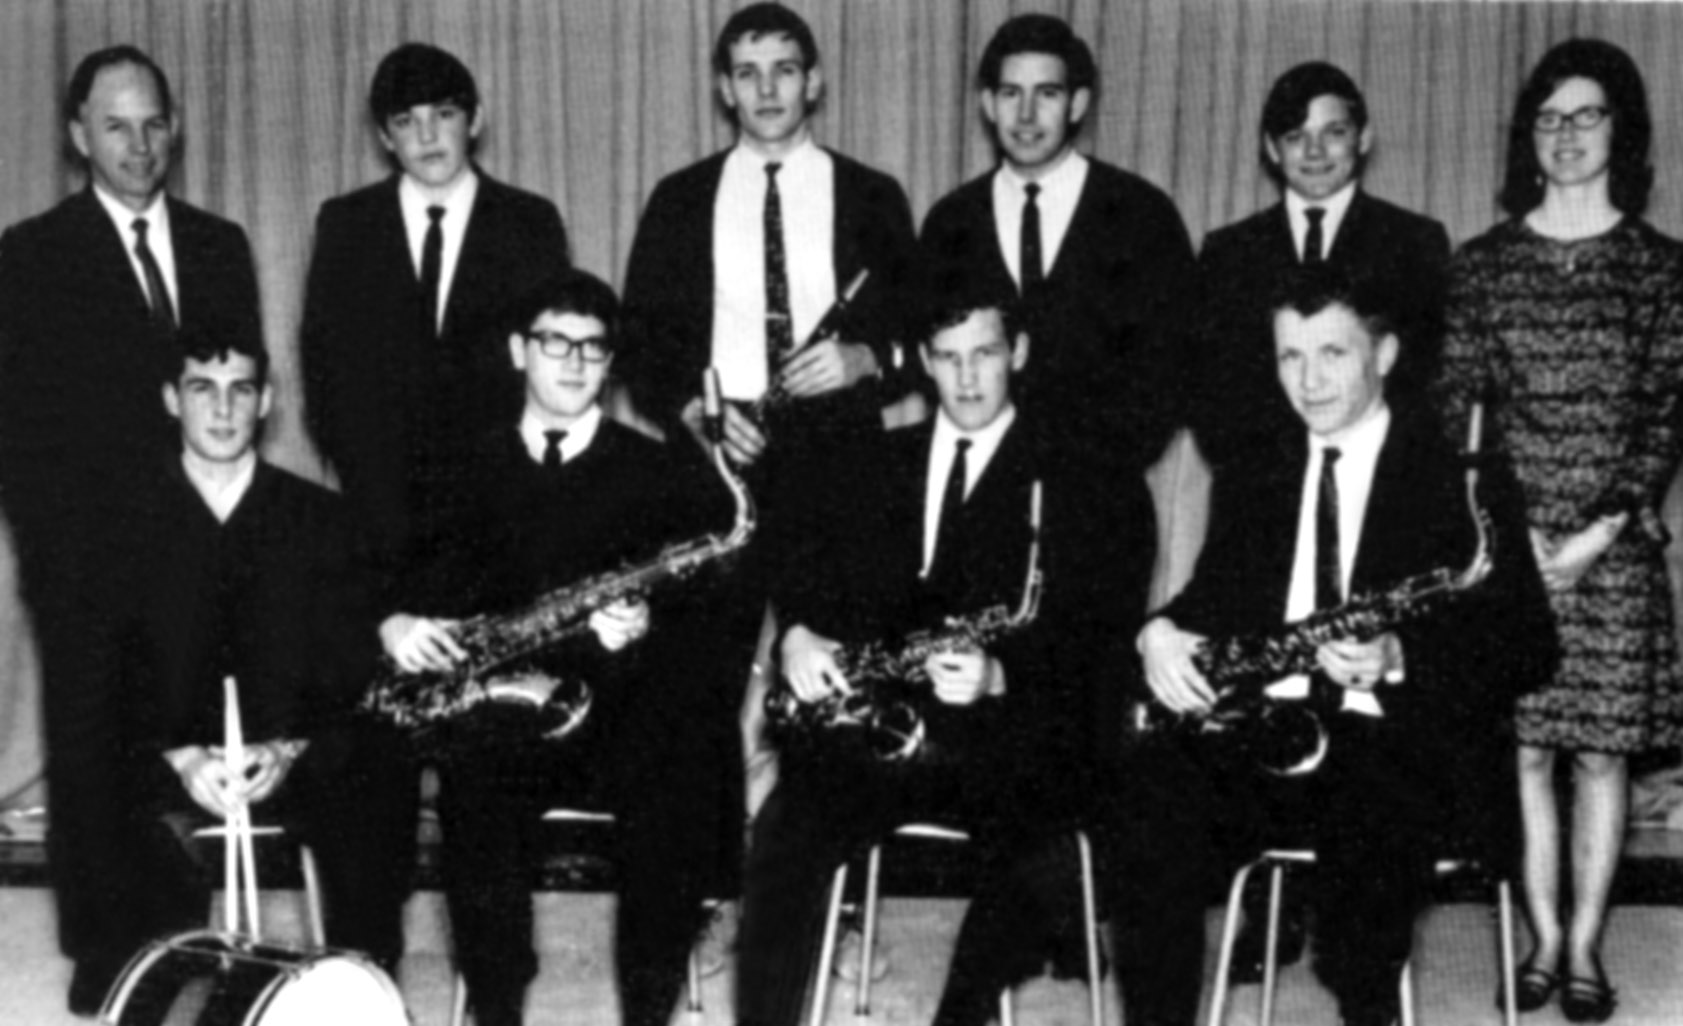 (Click to Magnify) FRONT ROW: B. Myers, S. Taylor, K. Rattray, Keith Duckworth. BACK ROW: Mr. Beare, W. St.John, G. Whitney, G. Howroyd, T. Paul, Karen Duckworth